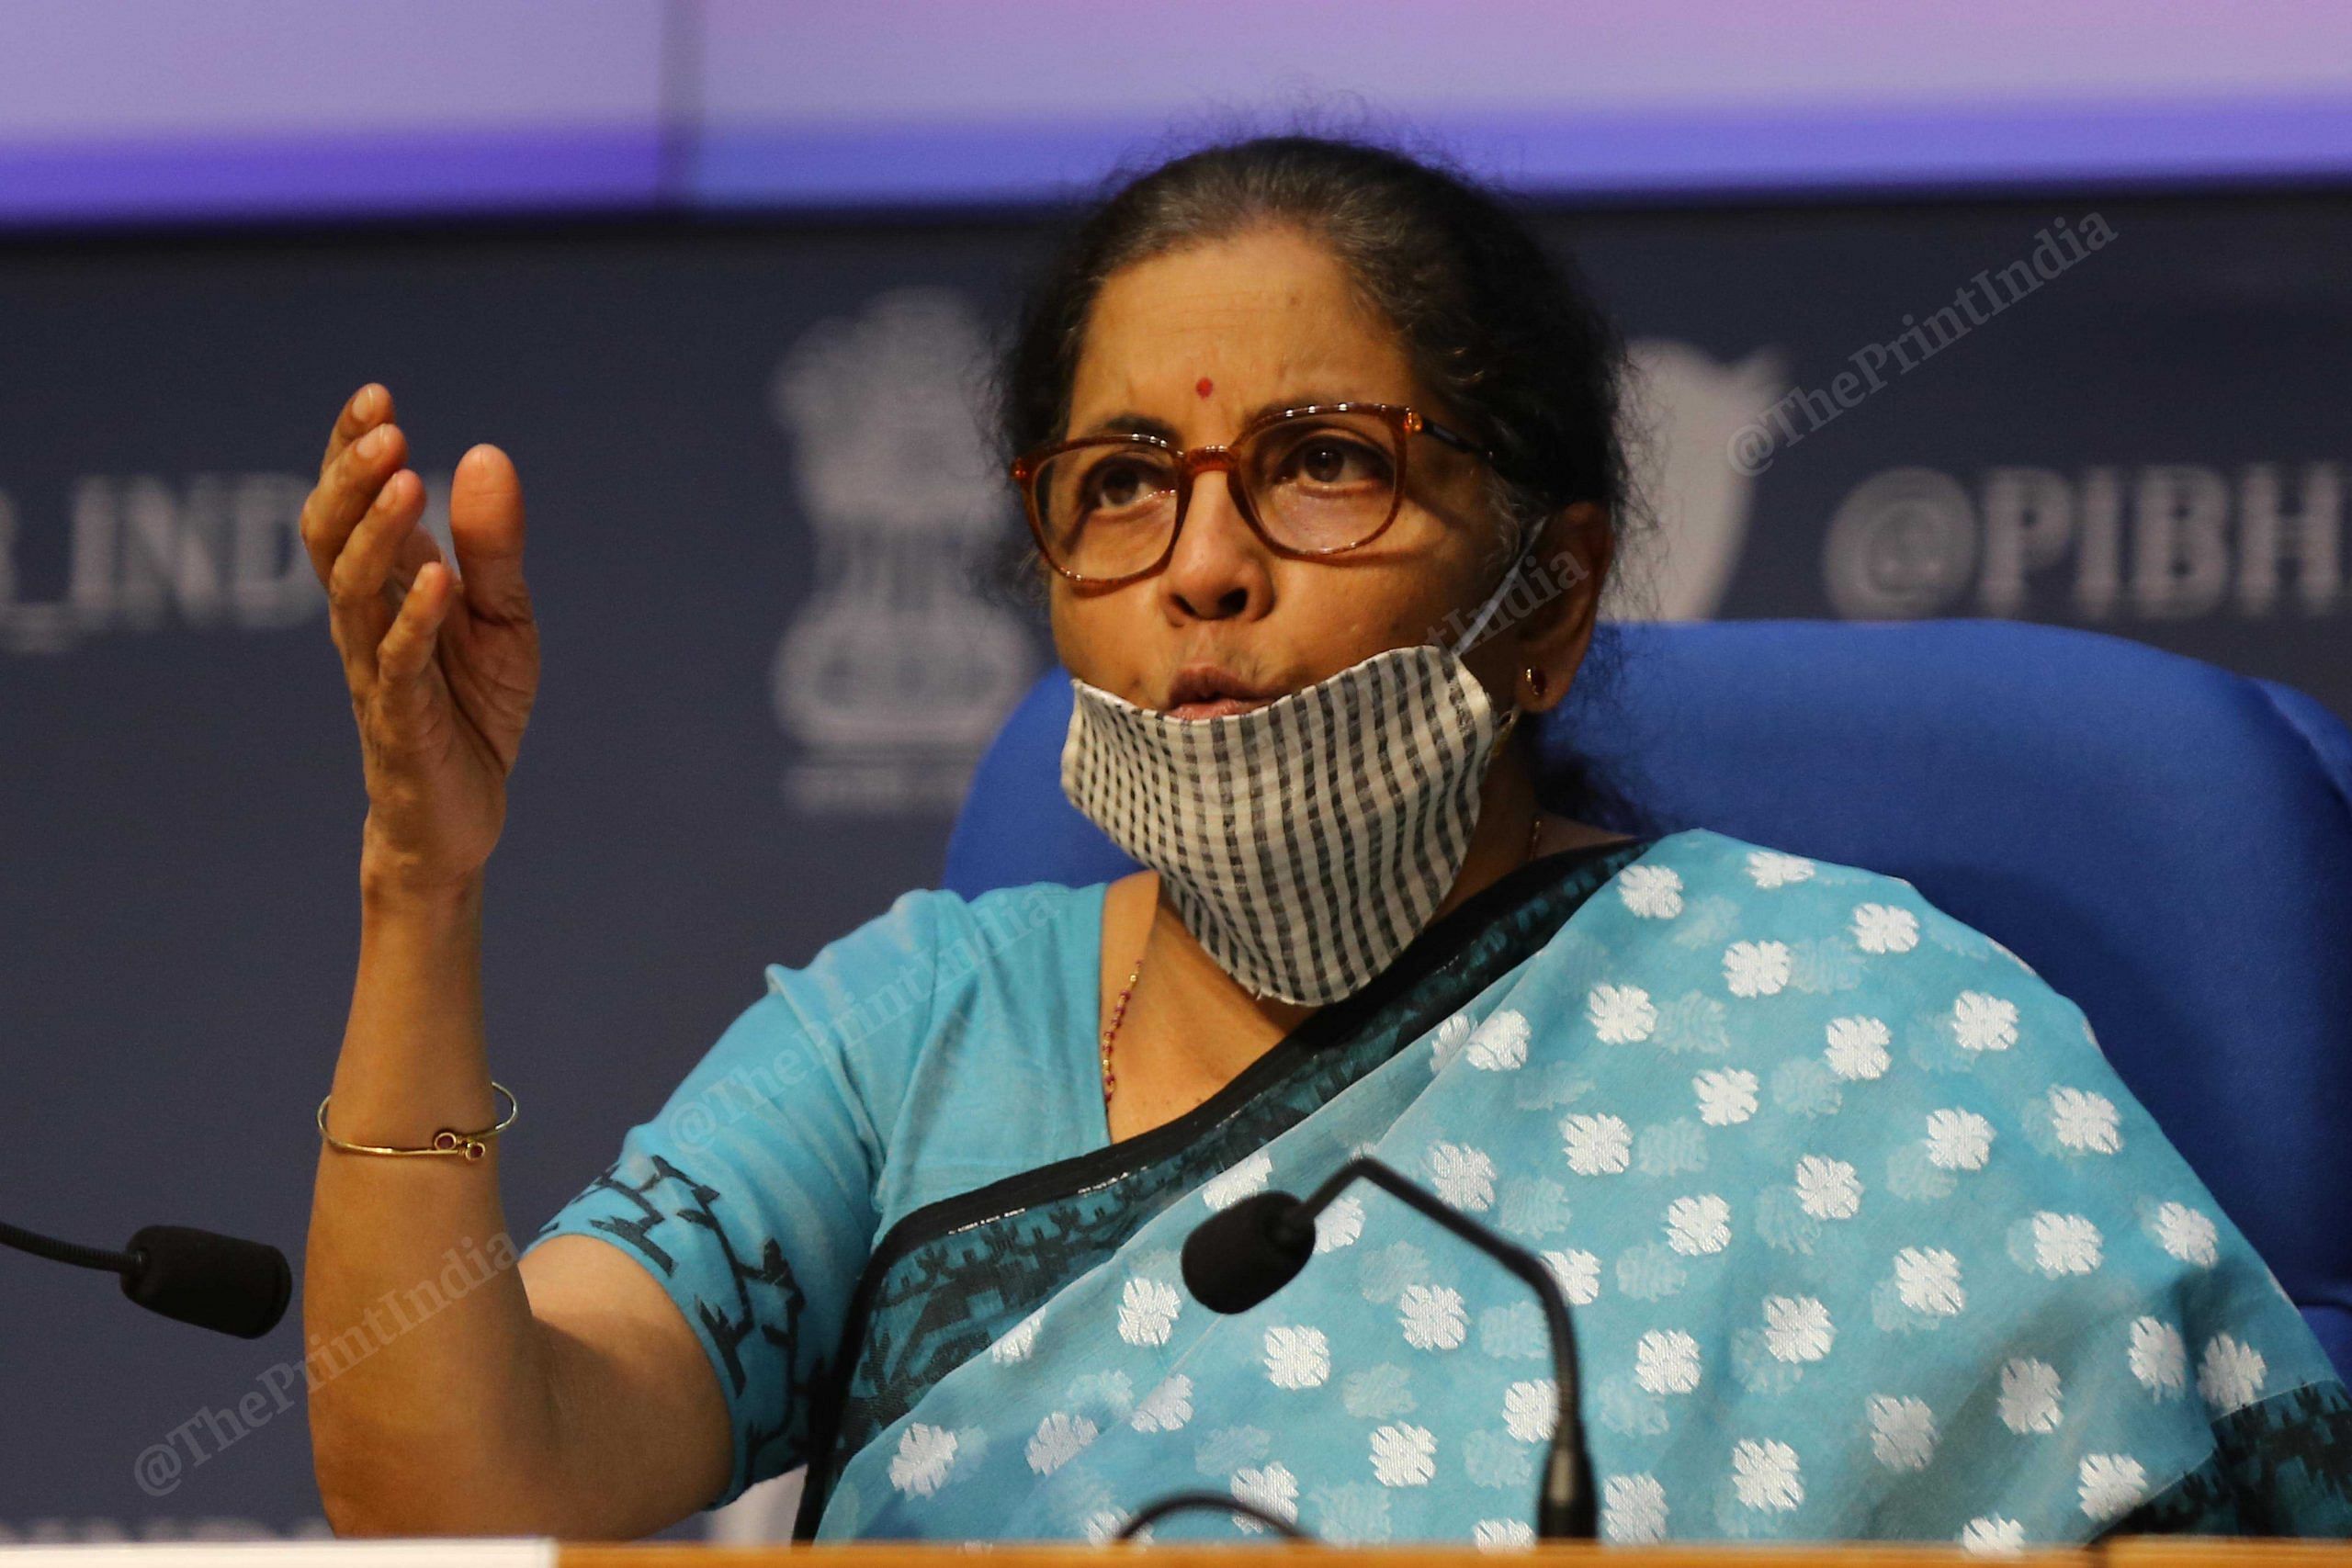 Finance Minister Nirmala Sitharamn in the first of the five press conferences about the Rs 20 lakh crore Covid-19 economic package | Photo by Suraj Singh Bisht